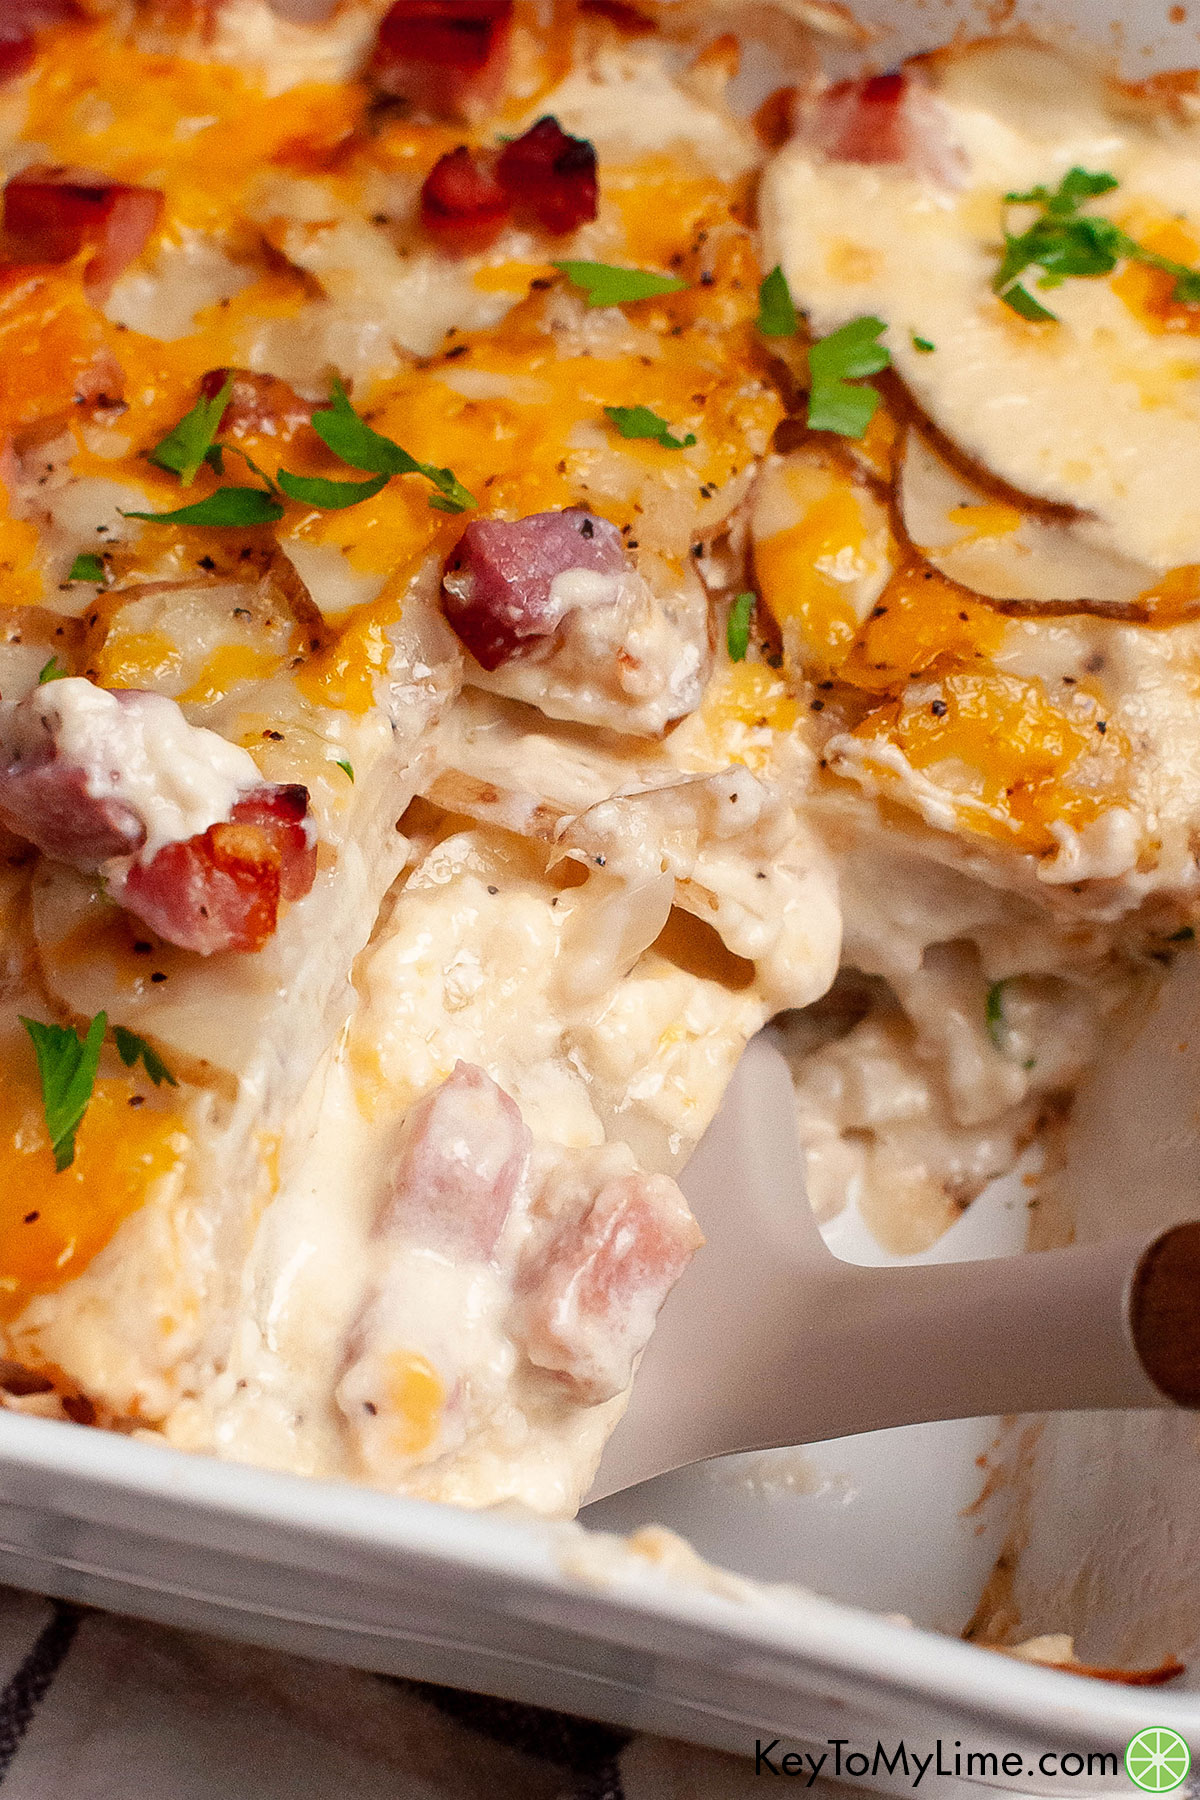 A close up shot showing the inside texture of the potato and ham casserole.